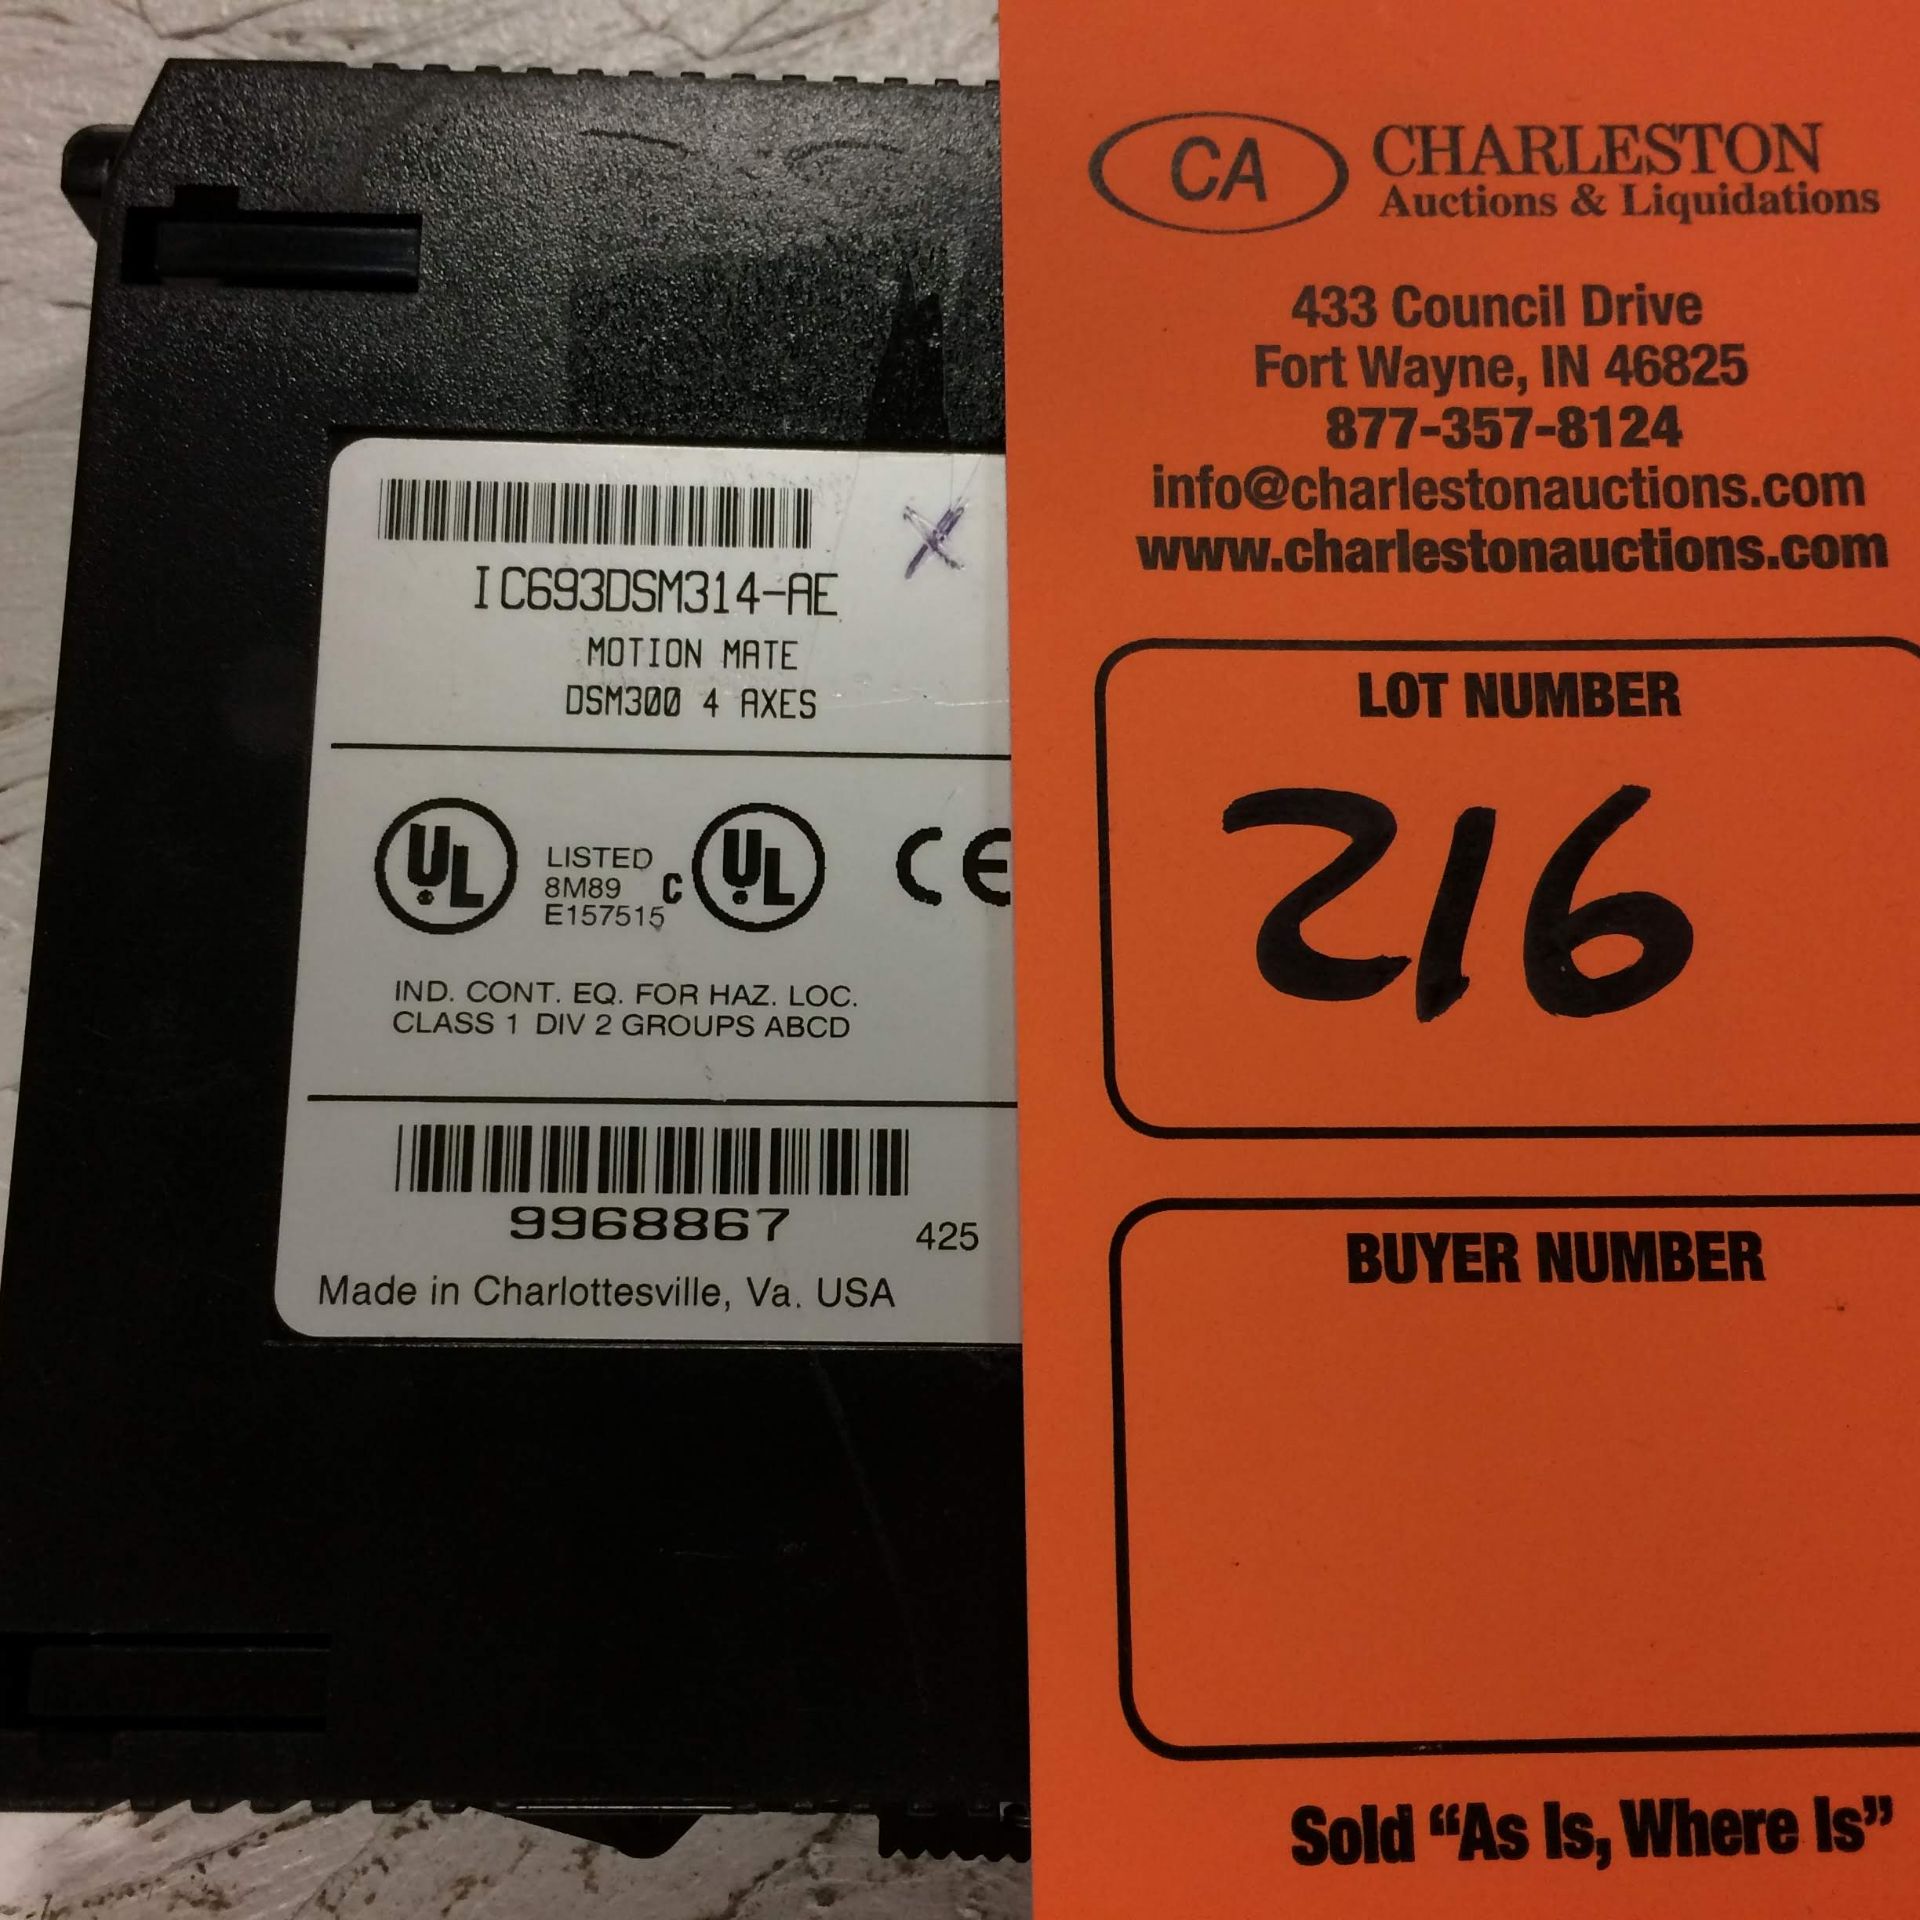 (1) IC693DSM314-AE GE FANUC MOTION MATE 4 AXES CONTROL MODULE USED. Pickup your lot(s) for free! - Image 2 of 4